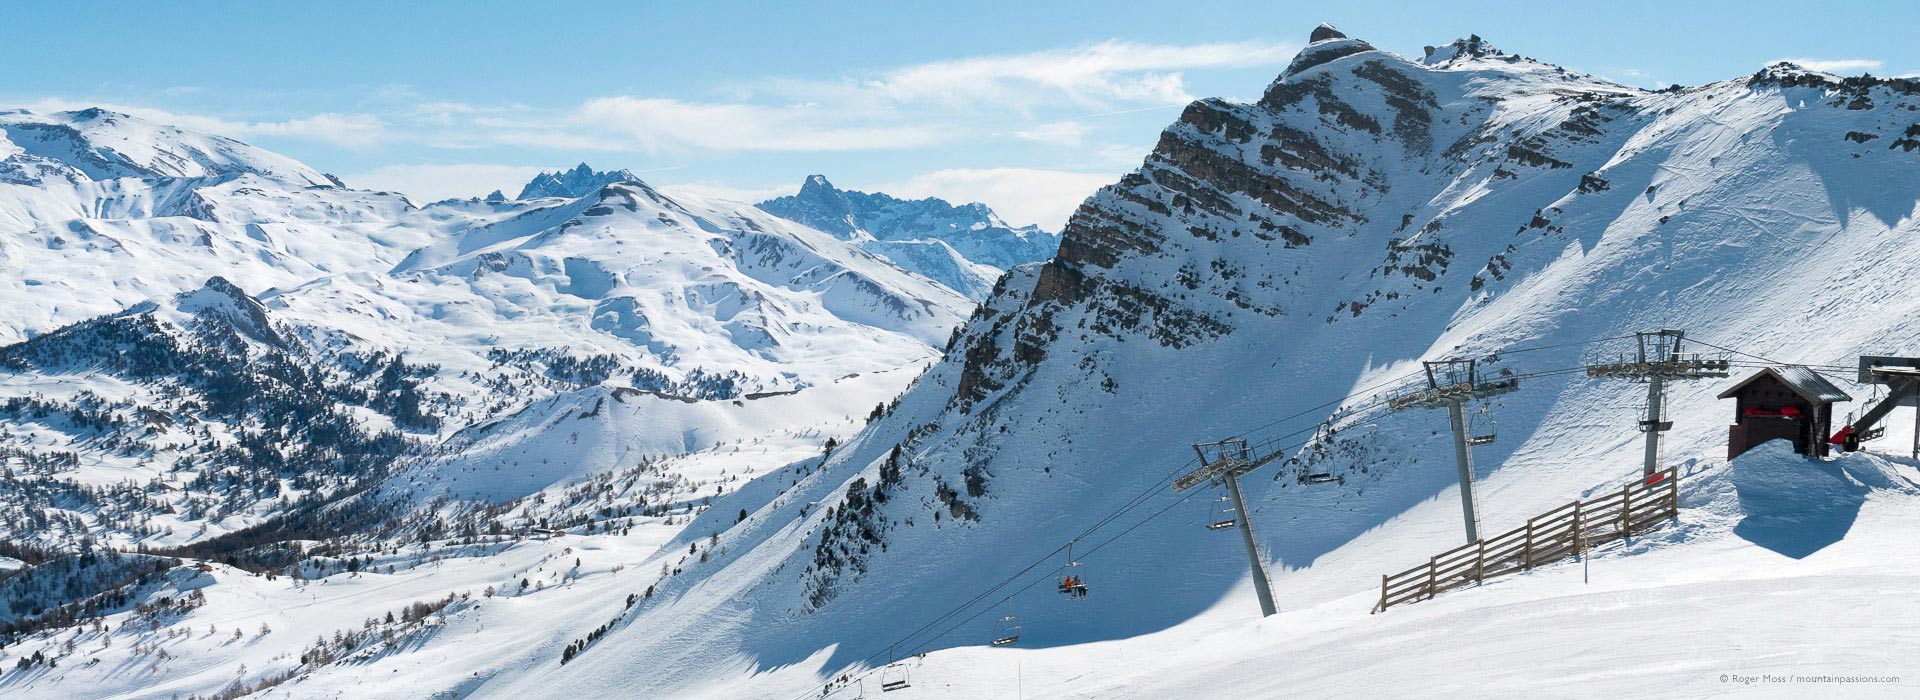 High view of snow-covered mountains with ski lift in foreground above Vars